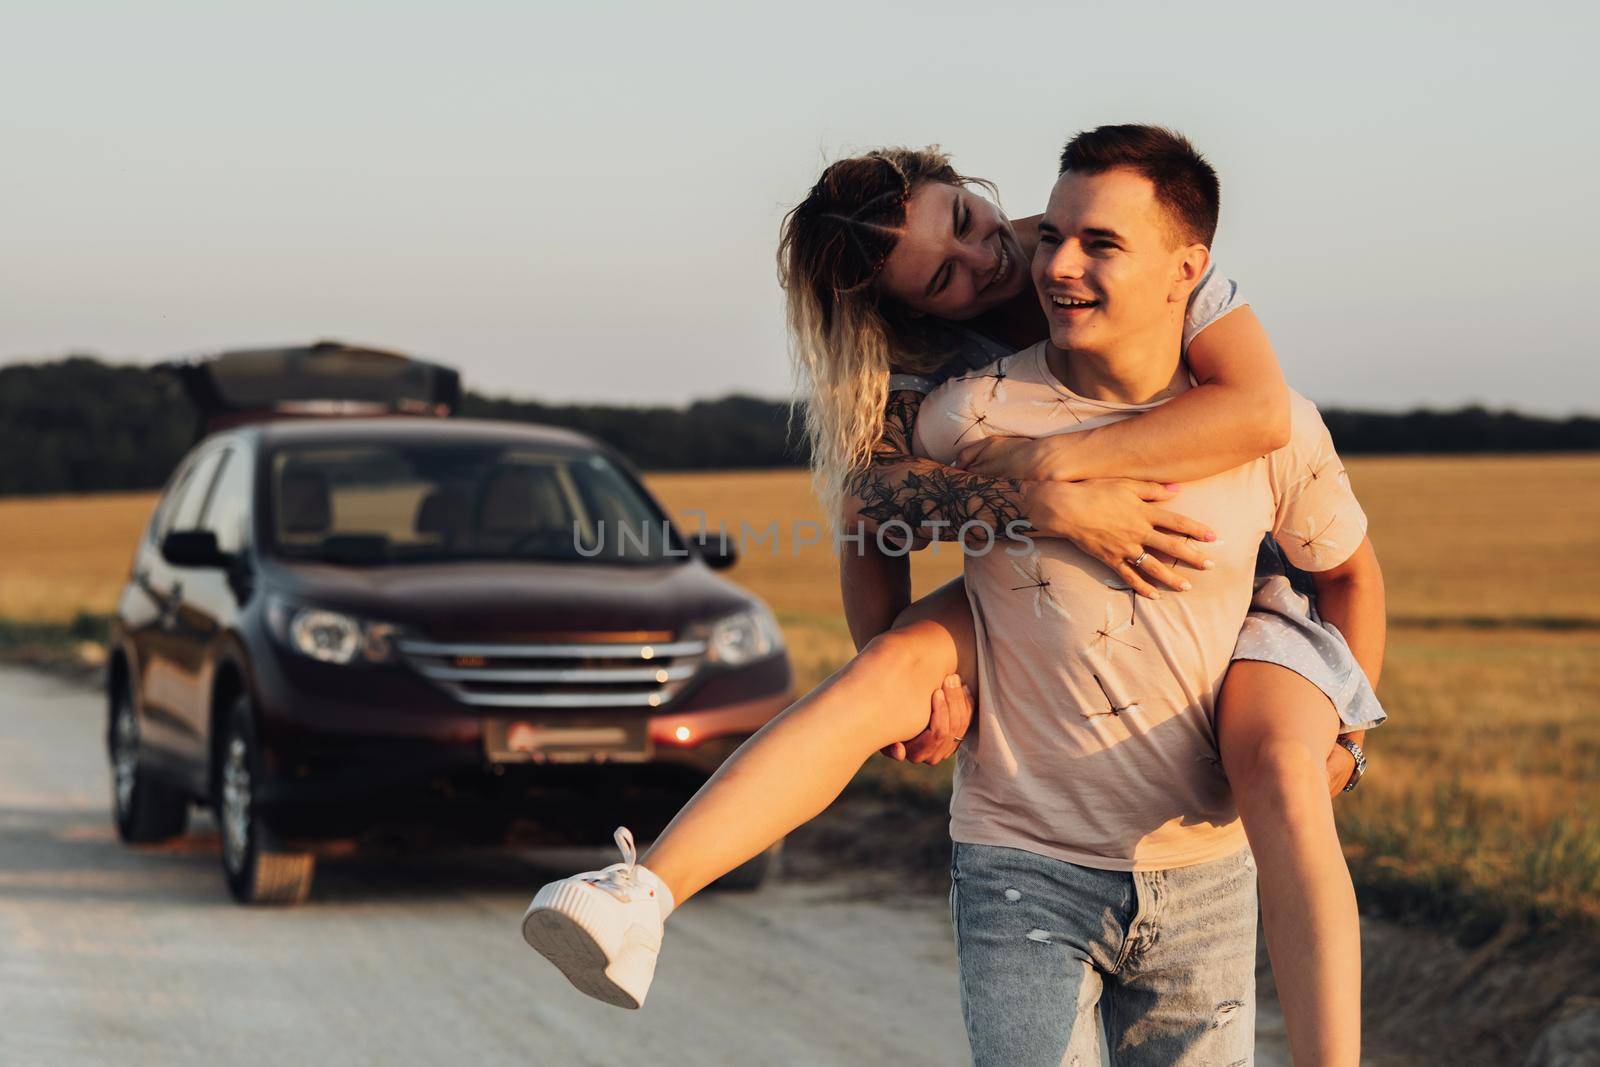 Caucasian Man Carries Girlfriend on His Back on Background of Their SUV Car, Young Couple Enjoying Their Road Trip at Sunset